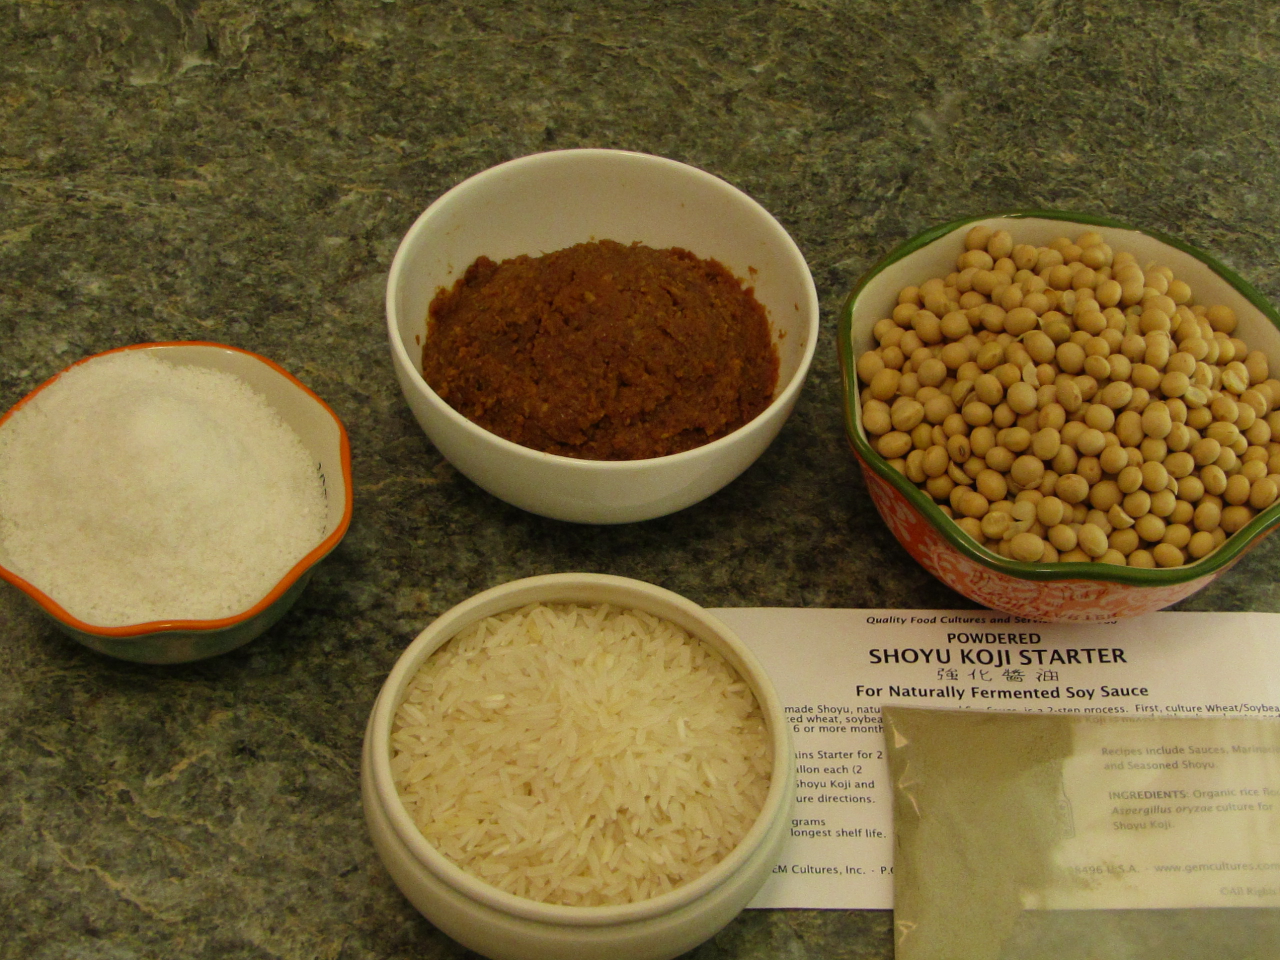 four bowls of various sizes, one containing miso, one soy beans, one filled with salt and another containing rice with a packet of kogi mold